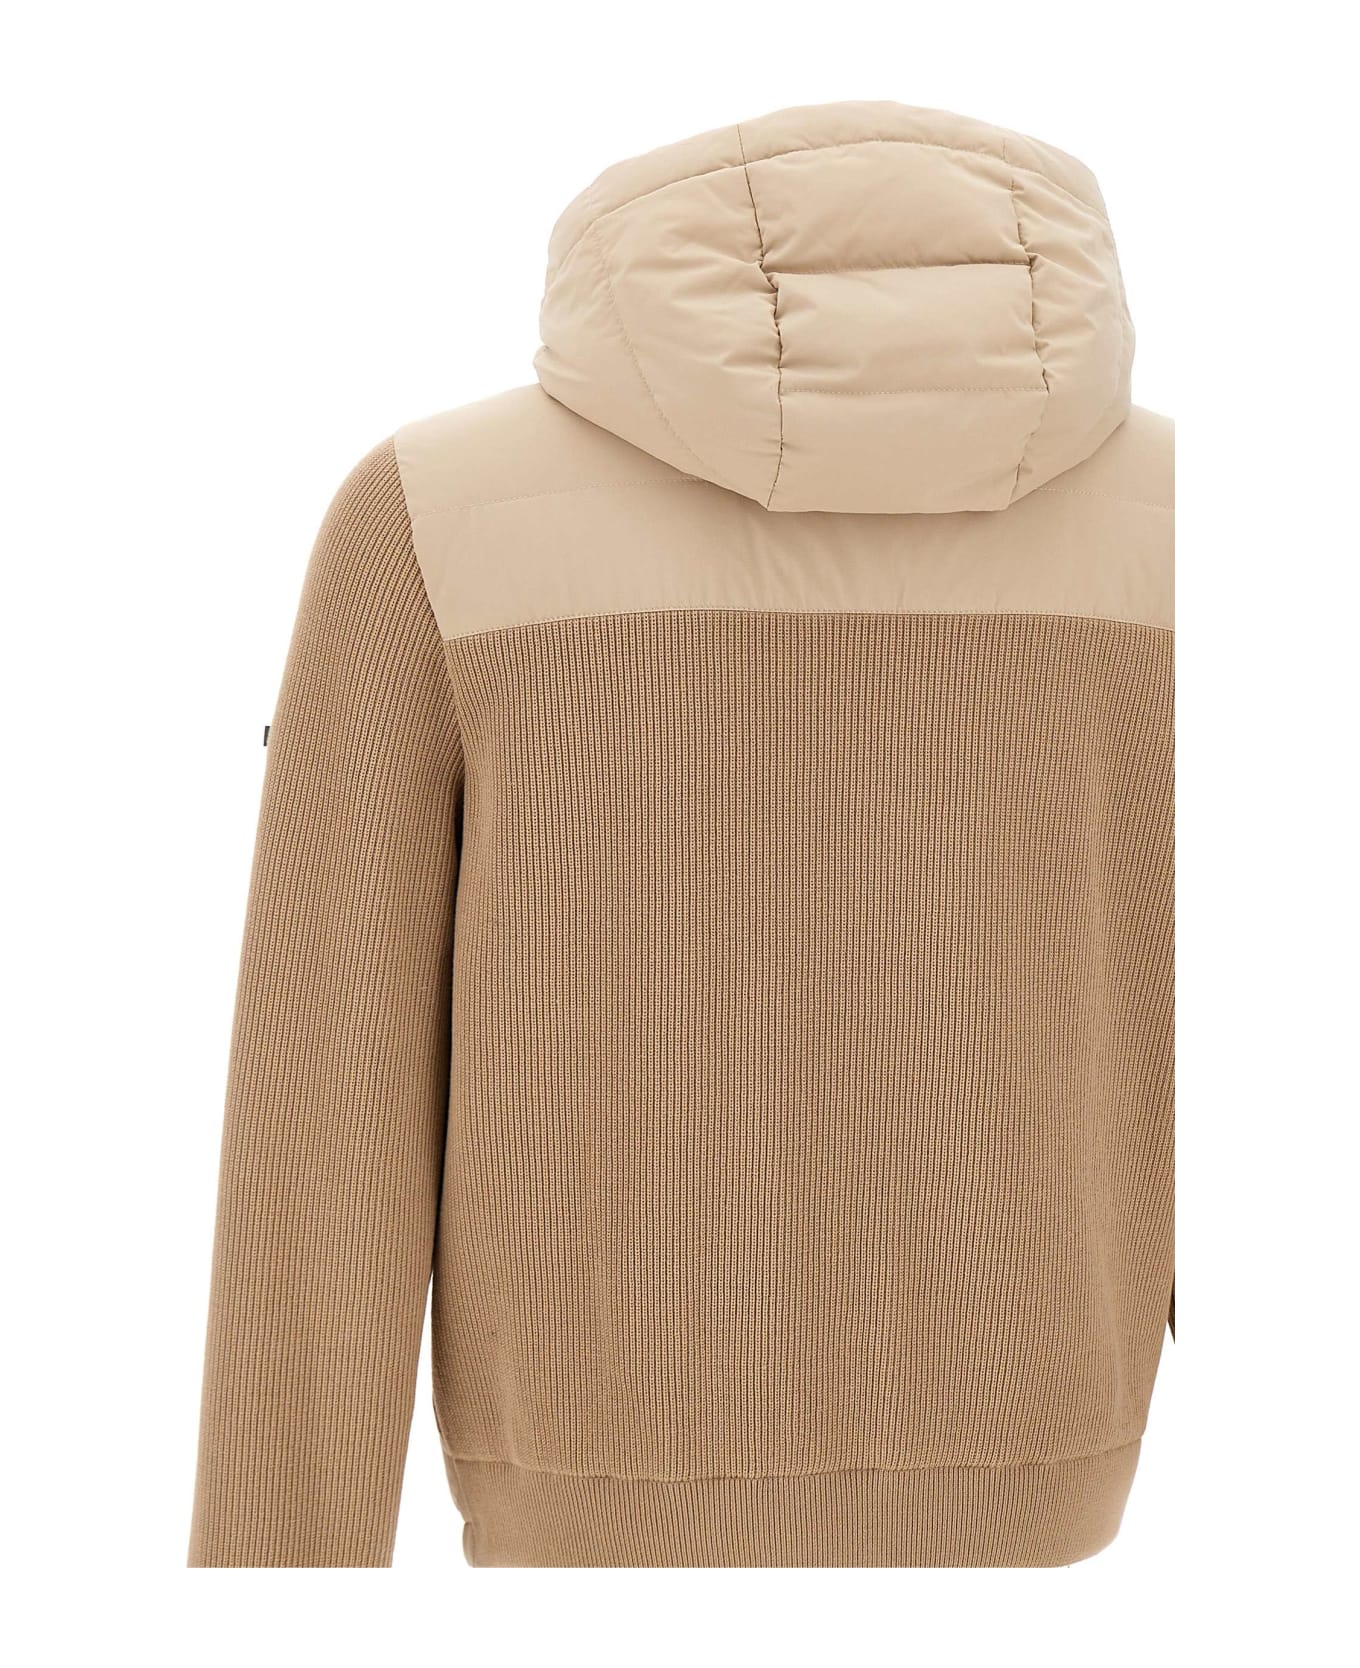 Peserico Knitted Jacket With Padding - BEIGE